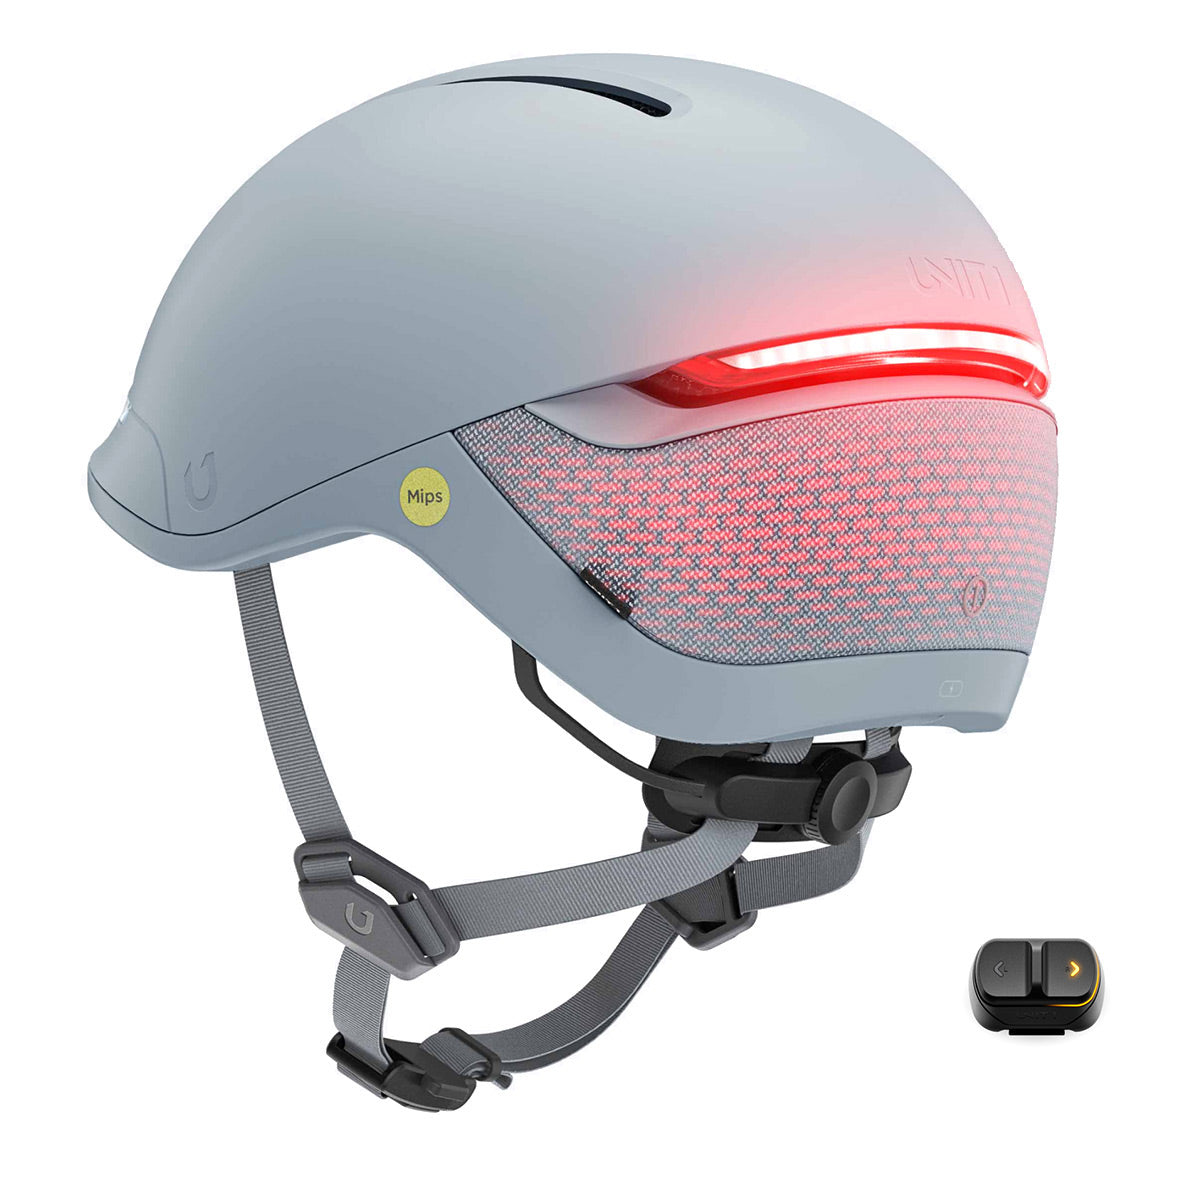 Unit 1 FARO Smart Helmet with Mips Impact Safety System & Wireless Navigation Remote for Directional Signaling - Large (Stingray)